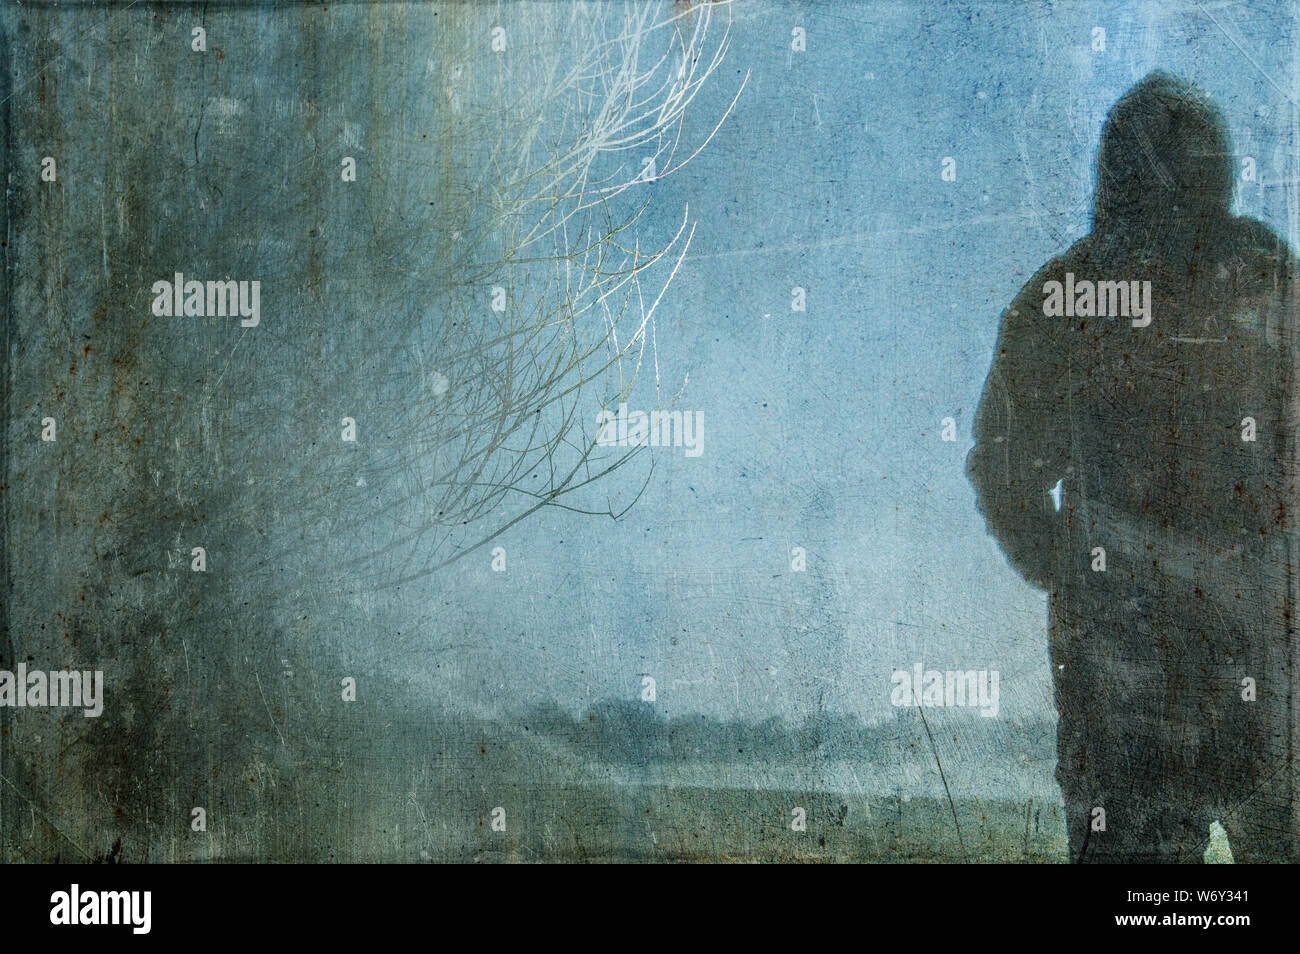 An eerie silhouette of a lone hooded figure in a field With a dark, spooky blurred abstract, grunge, vintage, edit. Stock Photo